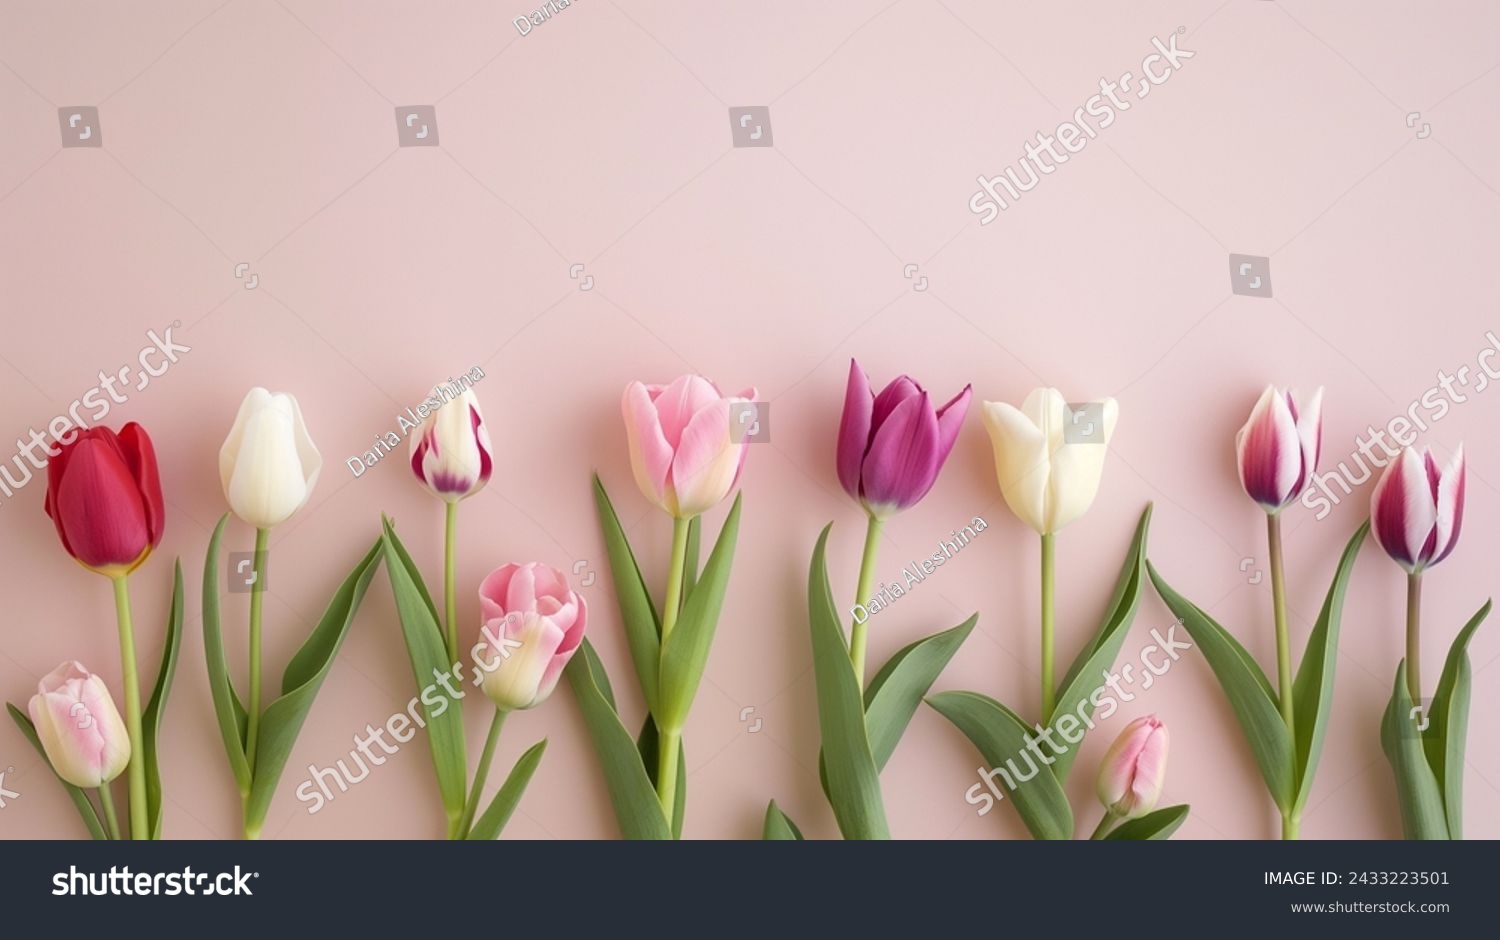 Elegant Tulips in Soft Pastel Tones, Delicate tulip flowers in a gradient of soft pink hues gently resting on a pastel background, symbolizing the arrival of spring and the beauty of nature #2433223501